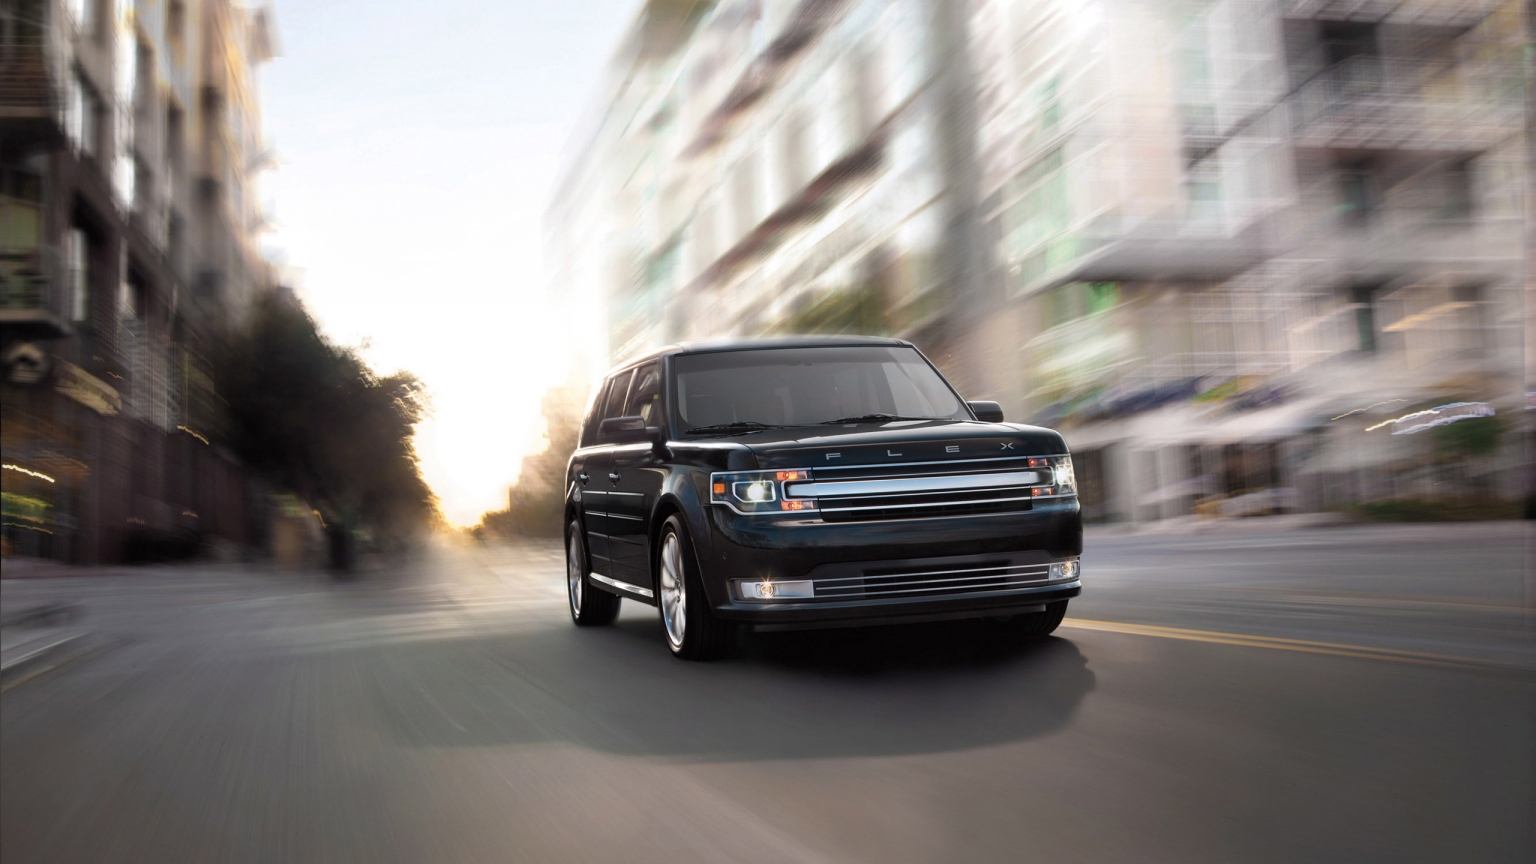 Speed with Ford Flex Model 2013 for 1536 x 864 HDTV resolution